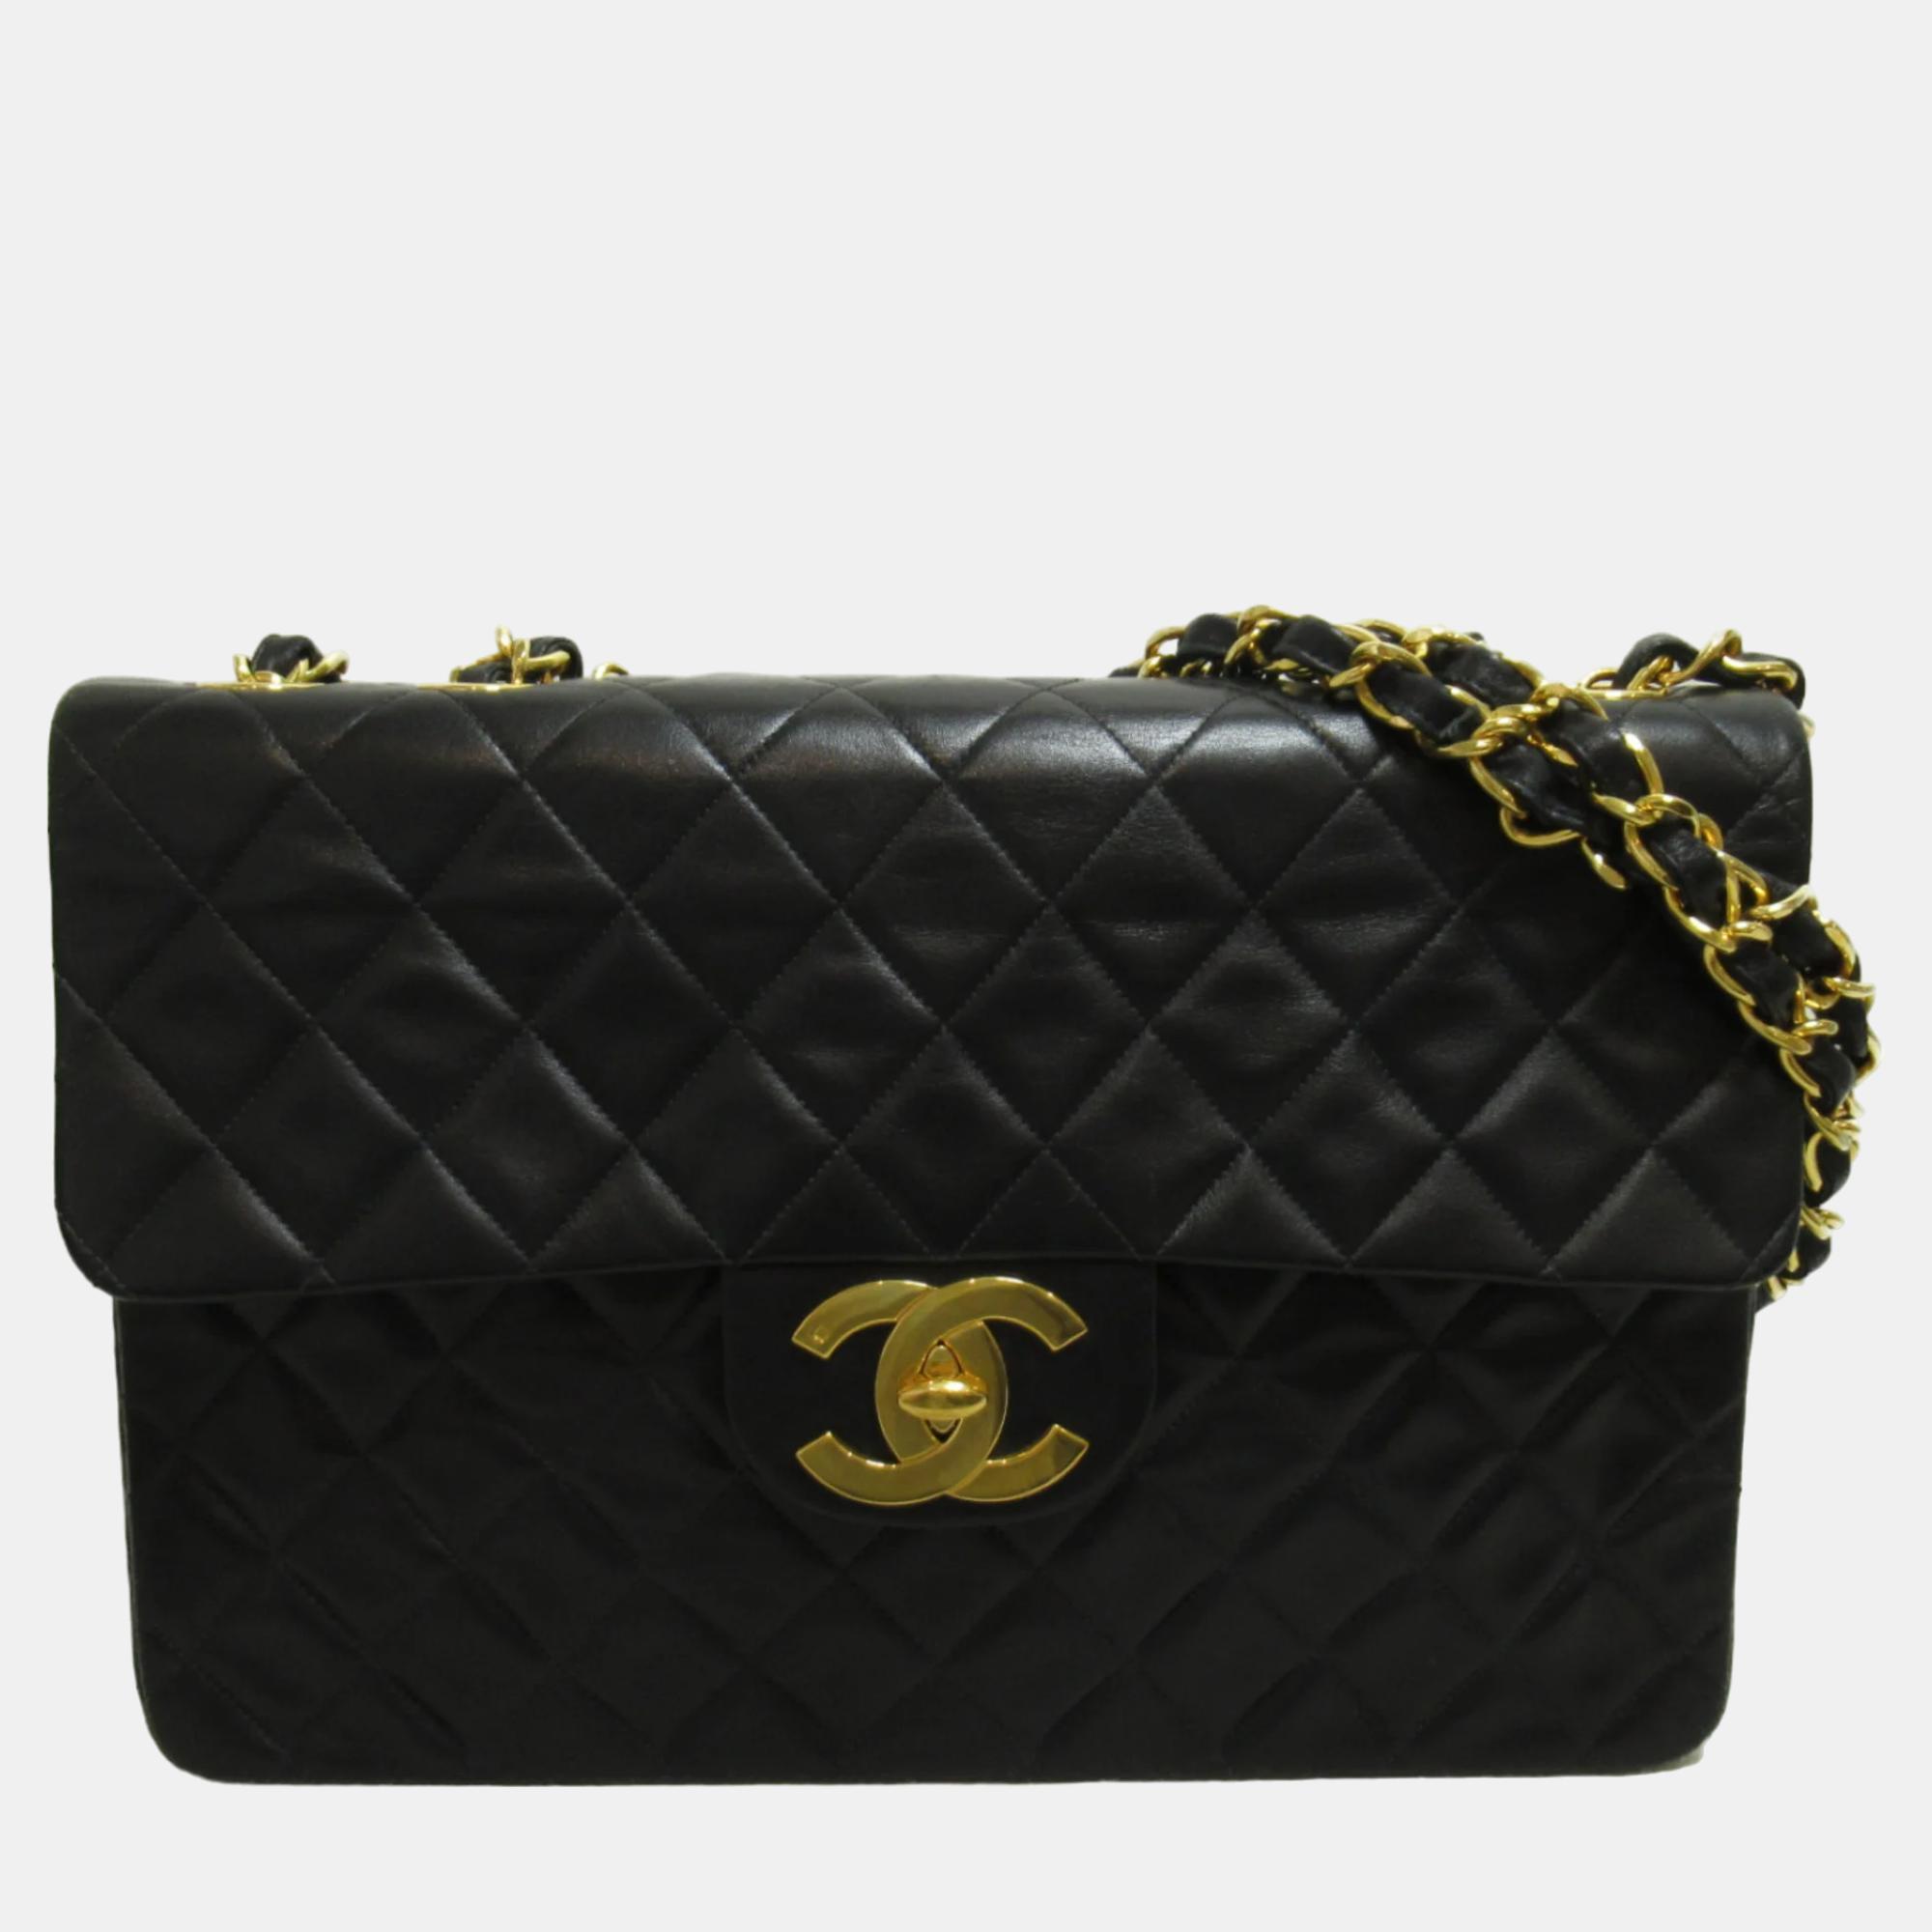 Chanel black quilted lambskin maxi vintage classic single flap bag